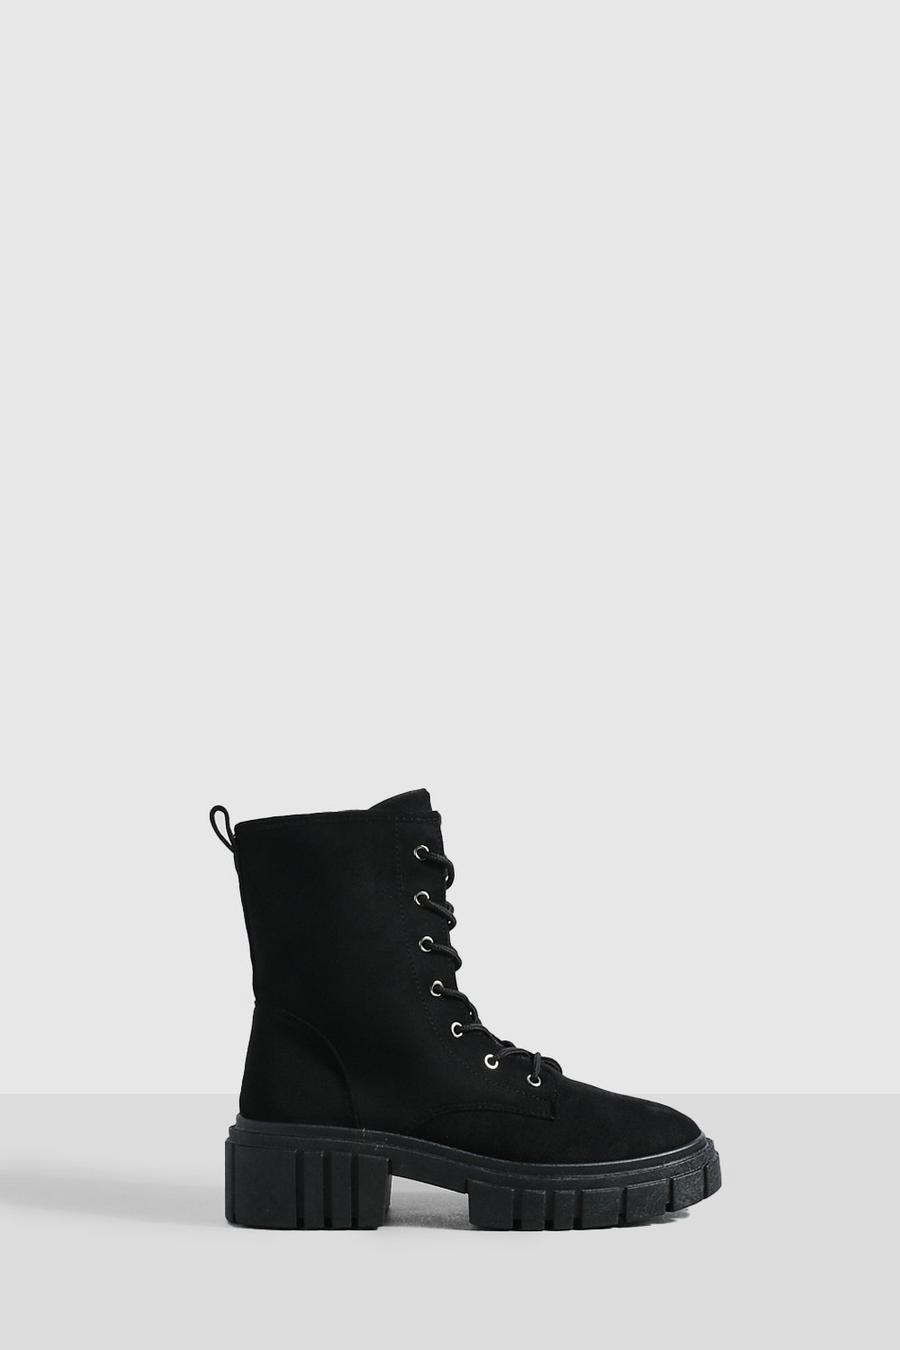 Black Cleated Sole Lace Up Hiker Boots image number 1